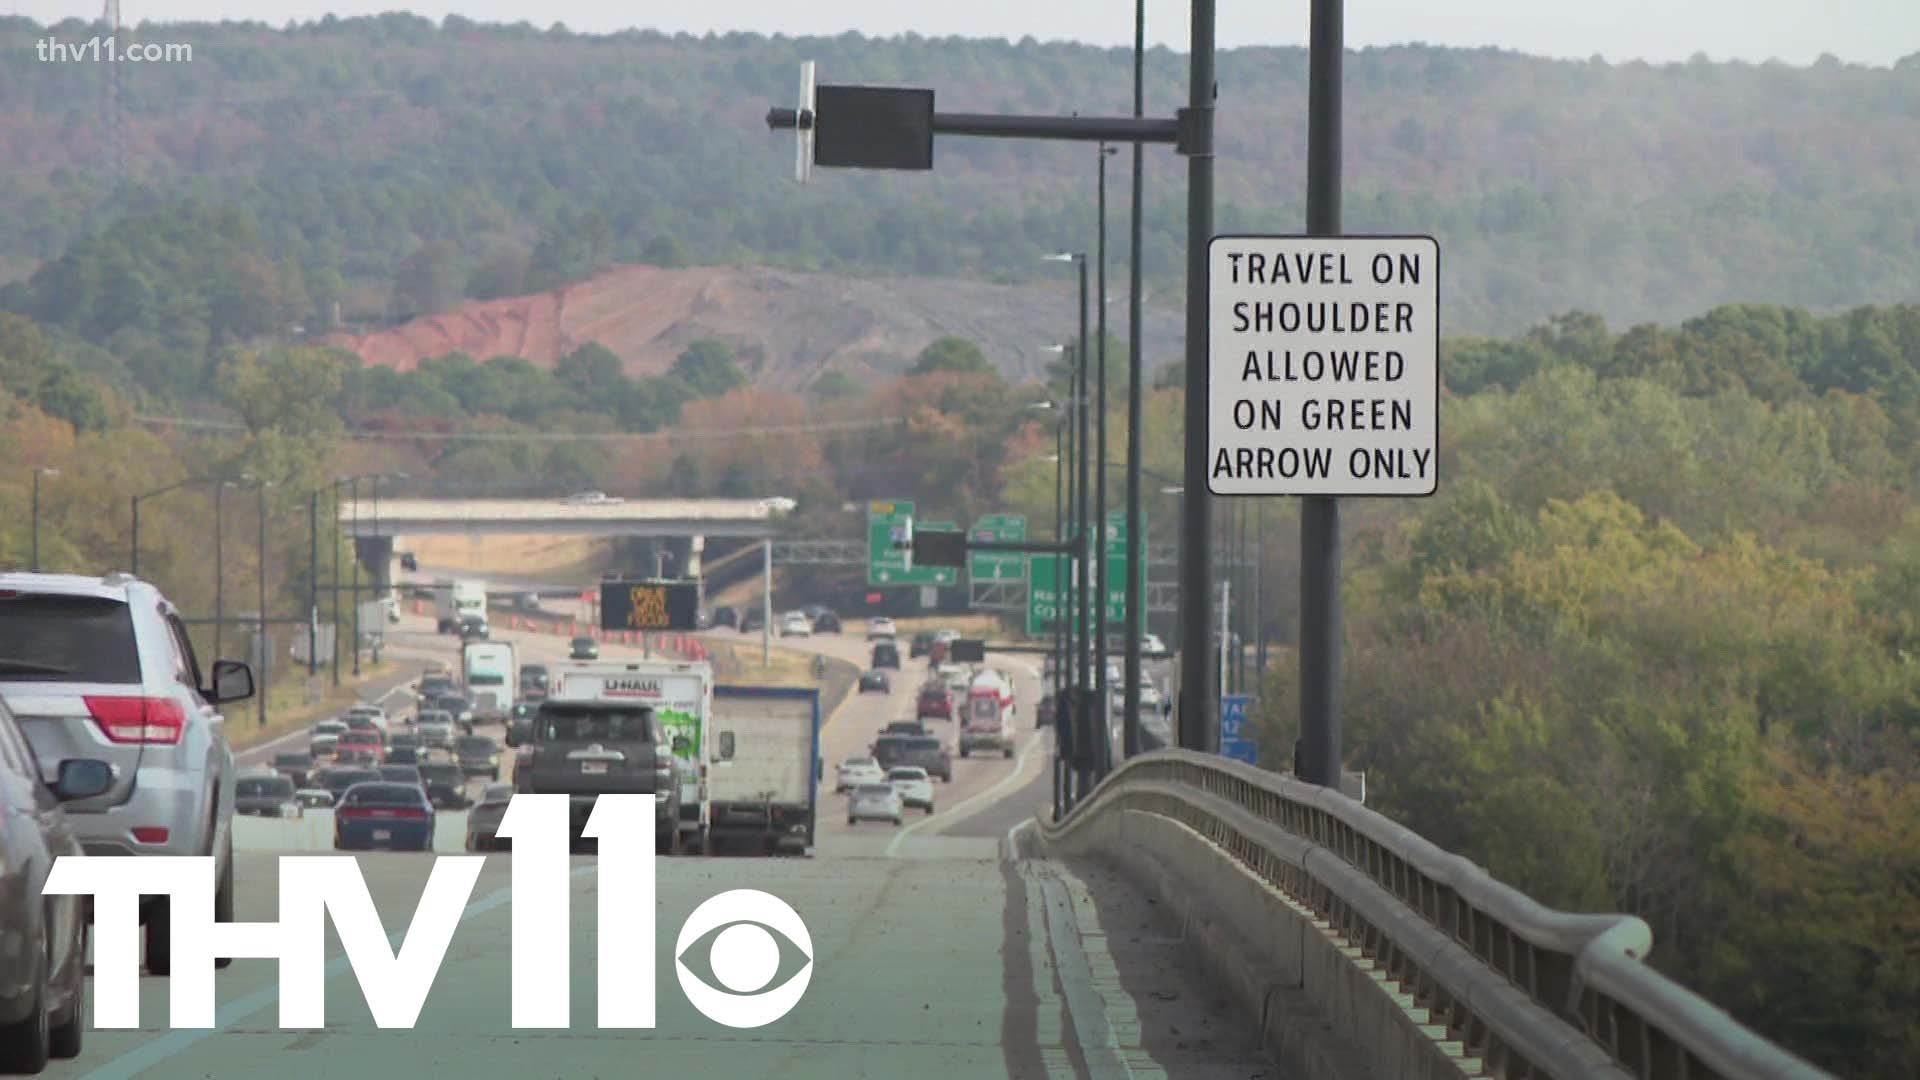 New technology is coming to make the commute easier for Arkansas drivers.